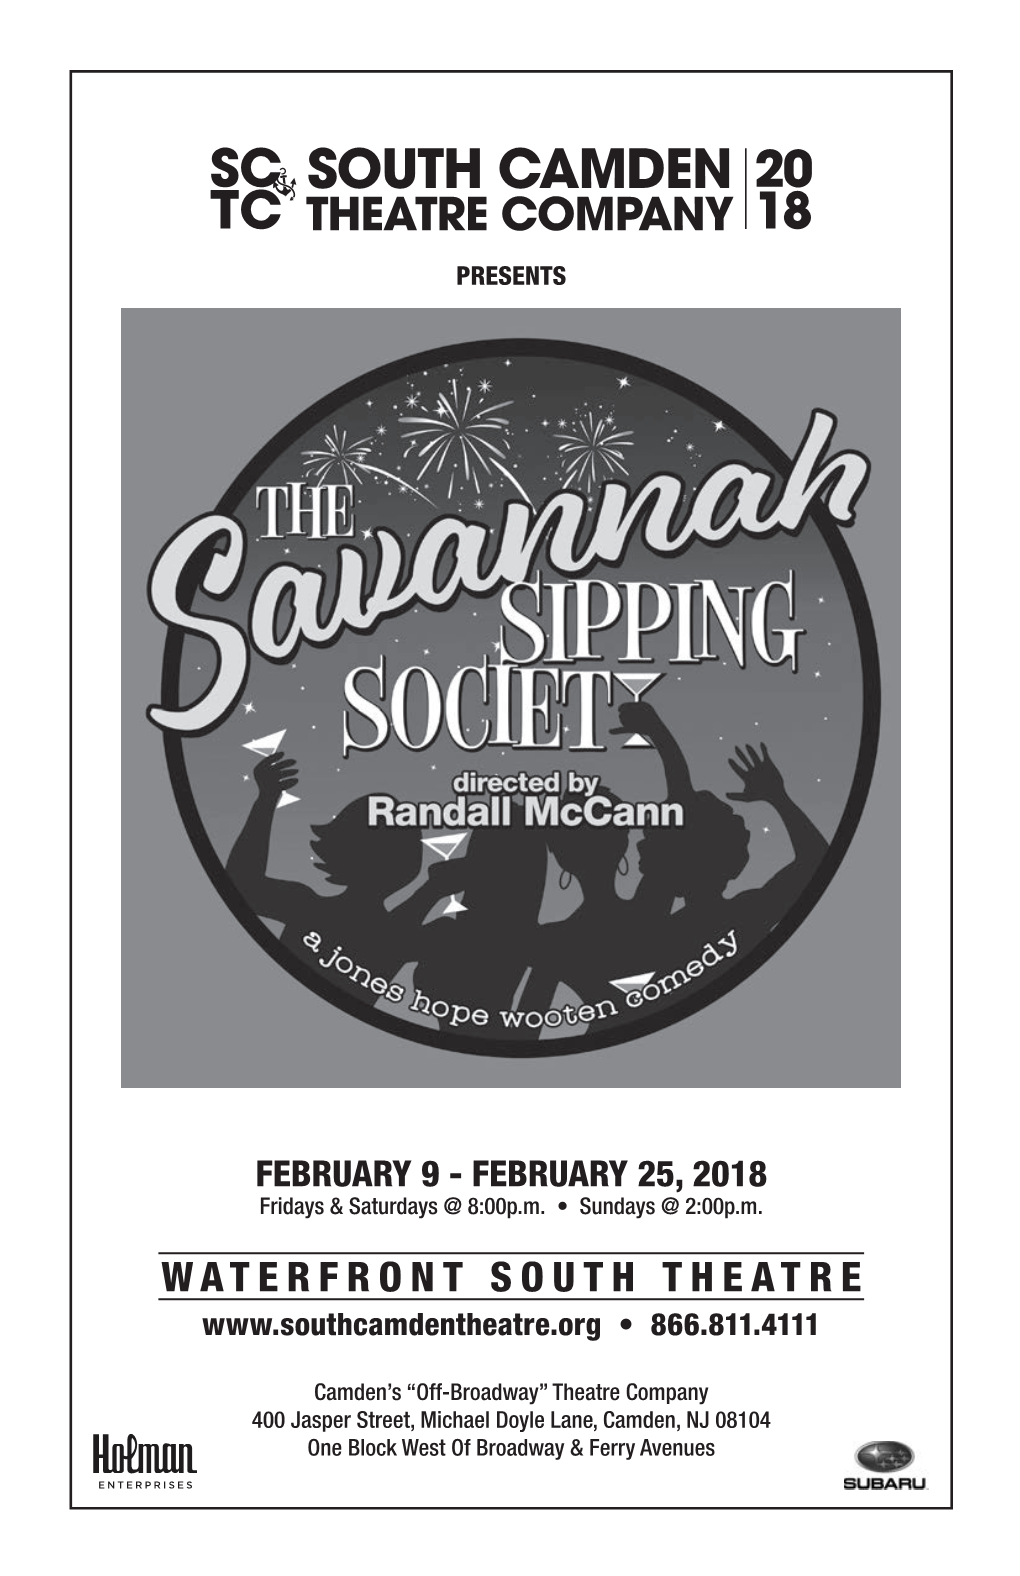 Waterfront South Theatre • 866.811.4111